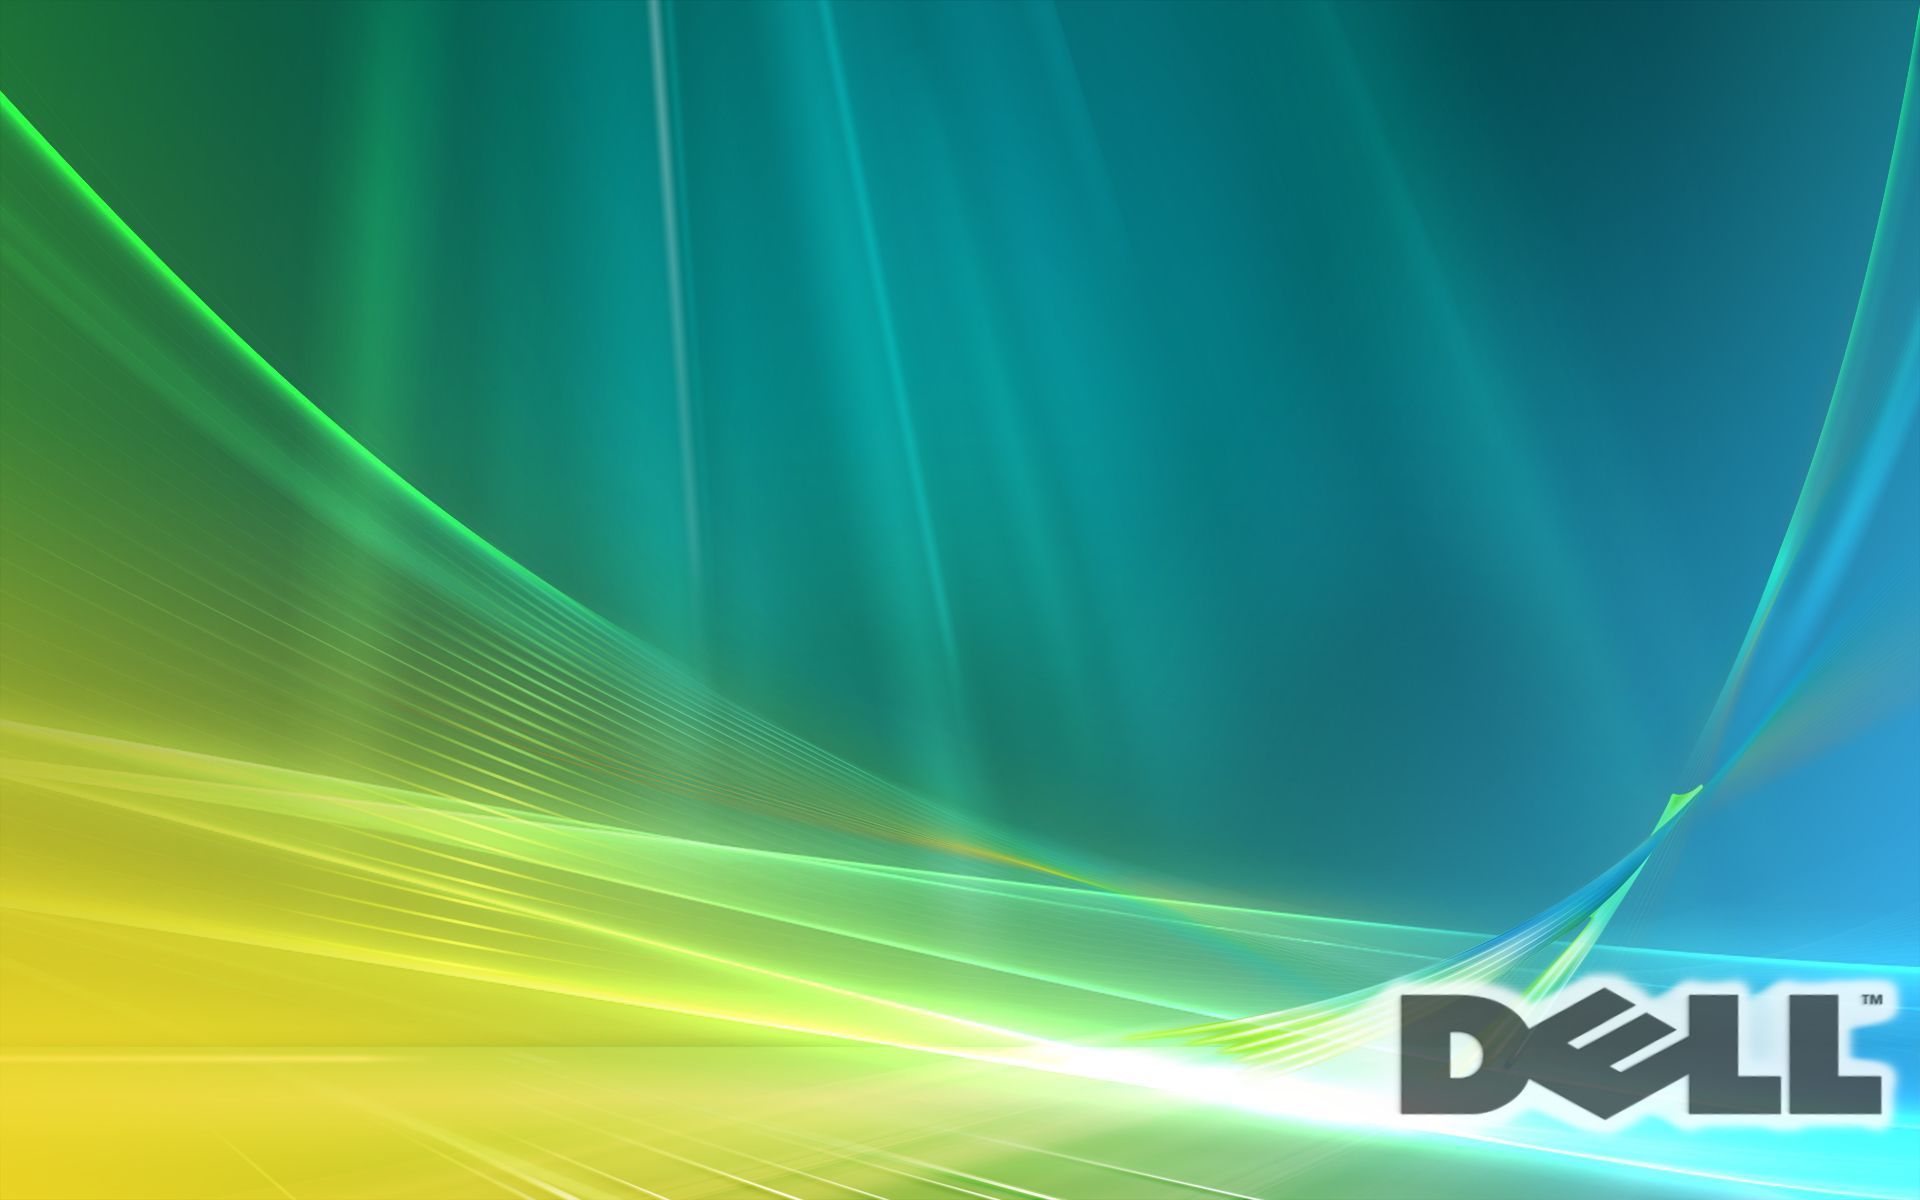 Wallpapers Dell 1920x1200 #dell